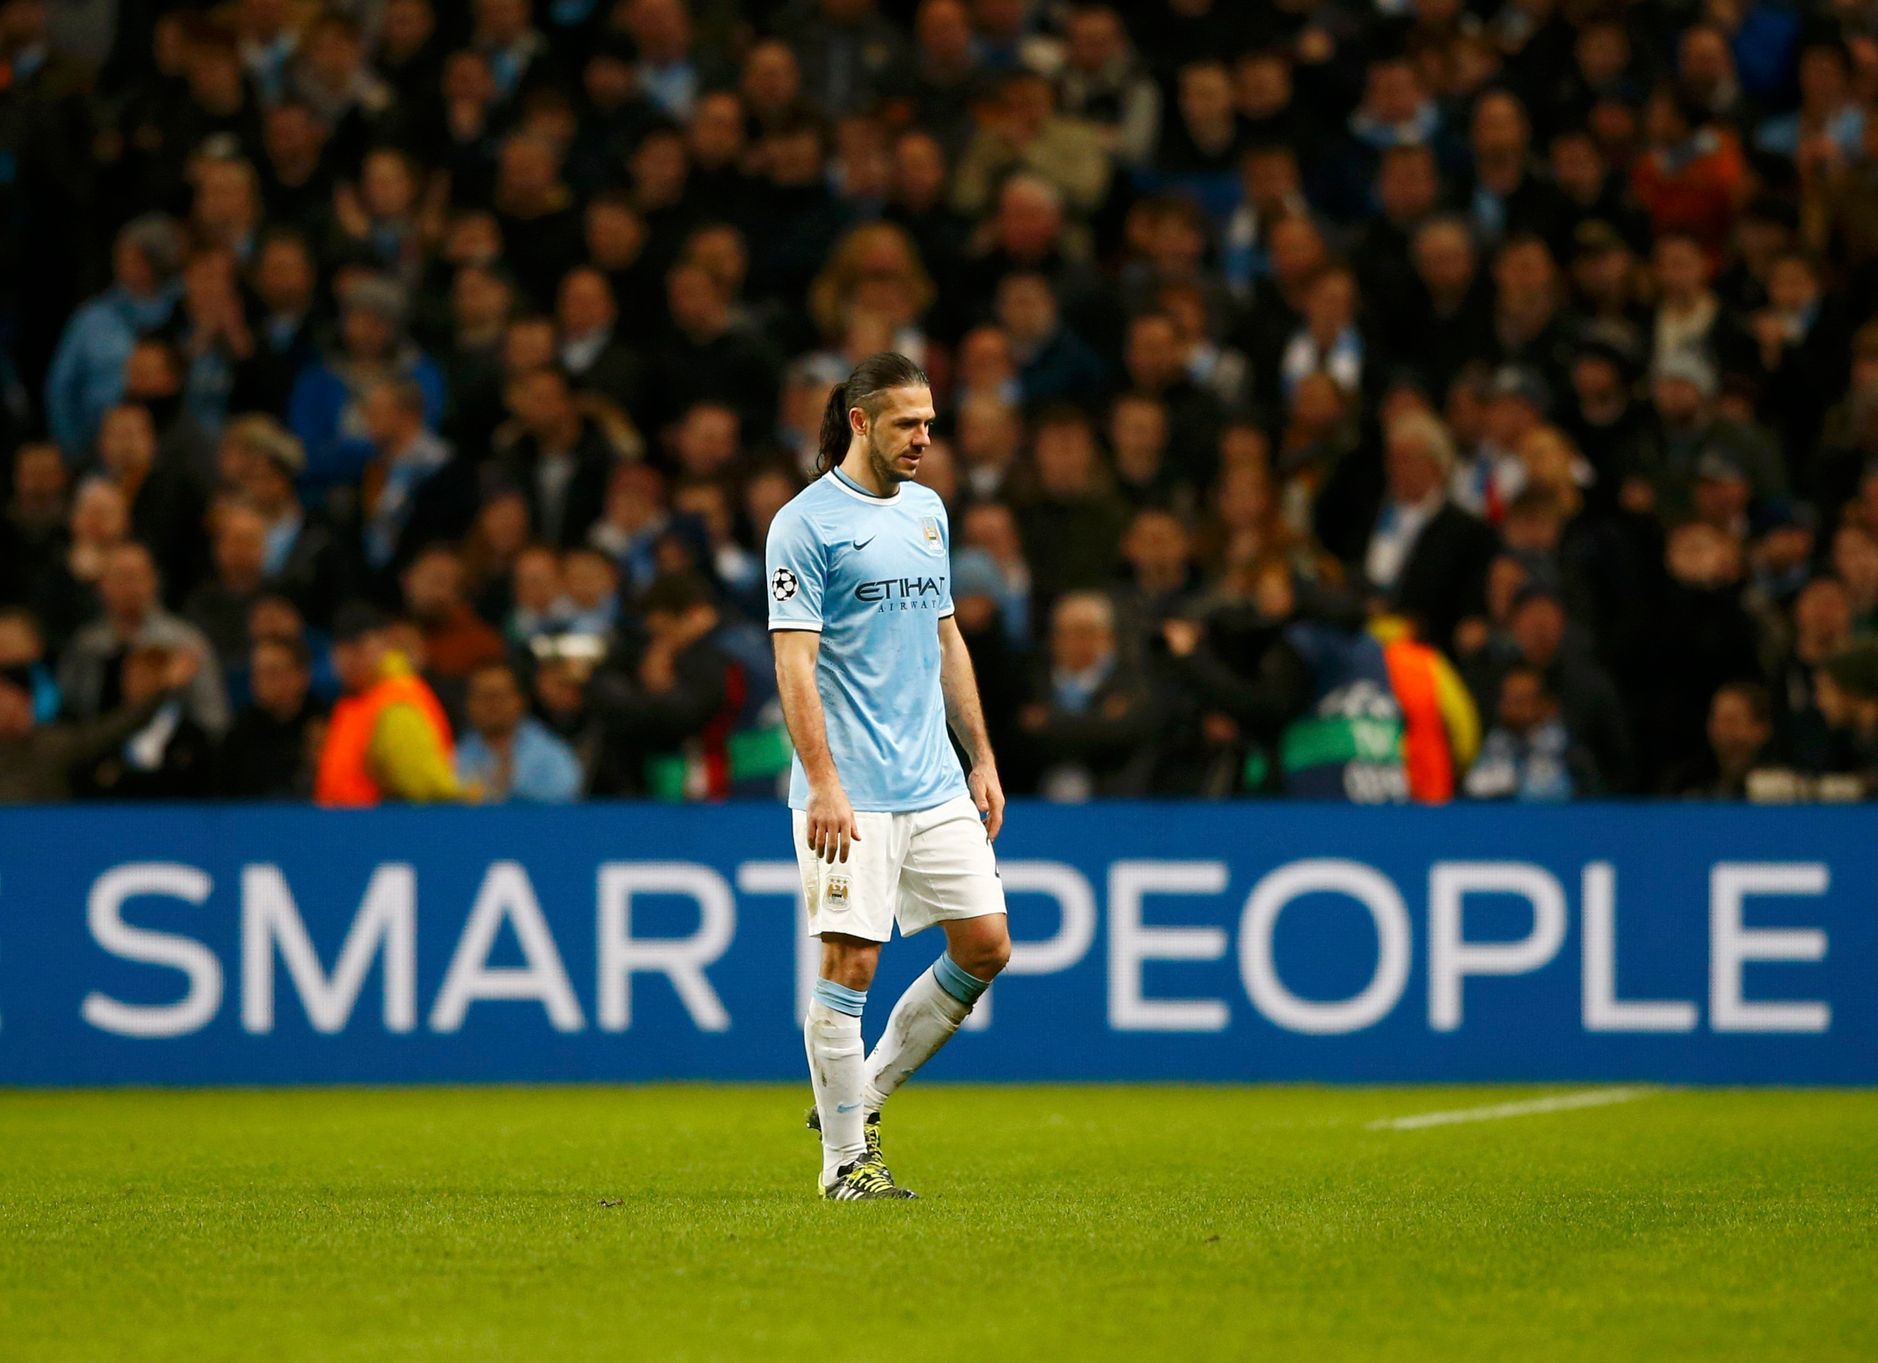 Manchester City's Martin Demichelis walks off after being shown the red card during their Champions League round of 16 first leg soccer match against Barcelona at the Etihad Stadium in Manchester